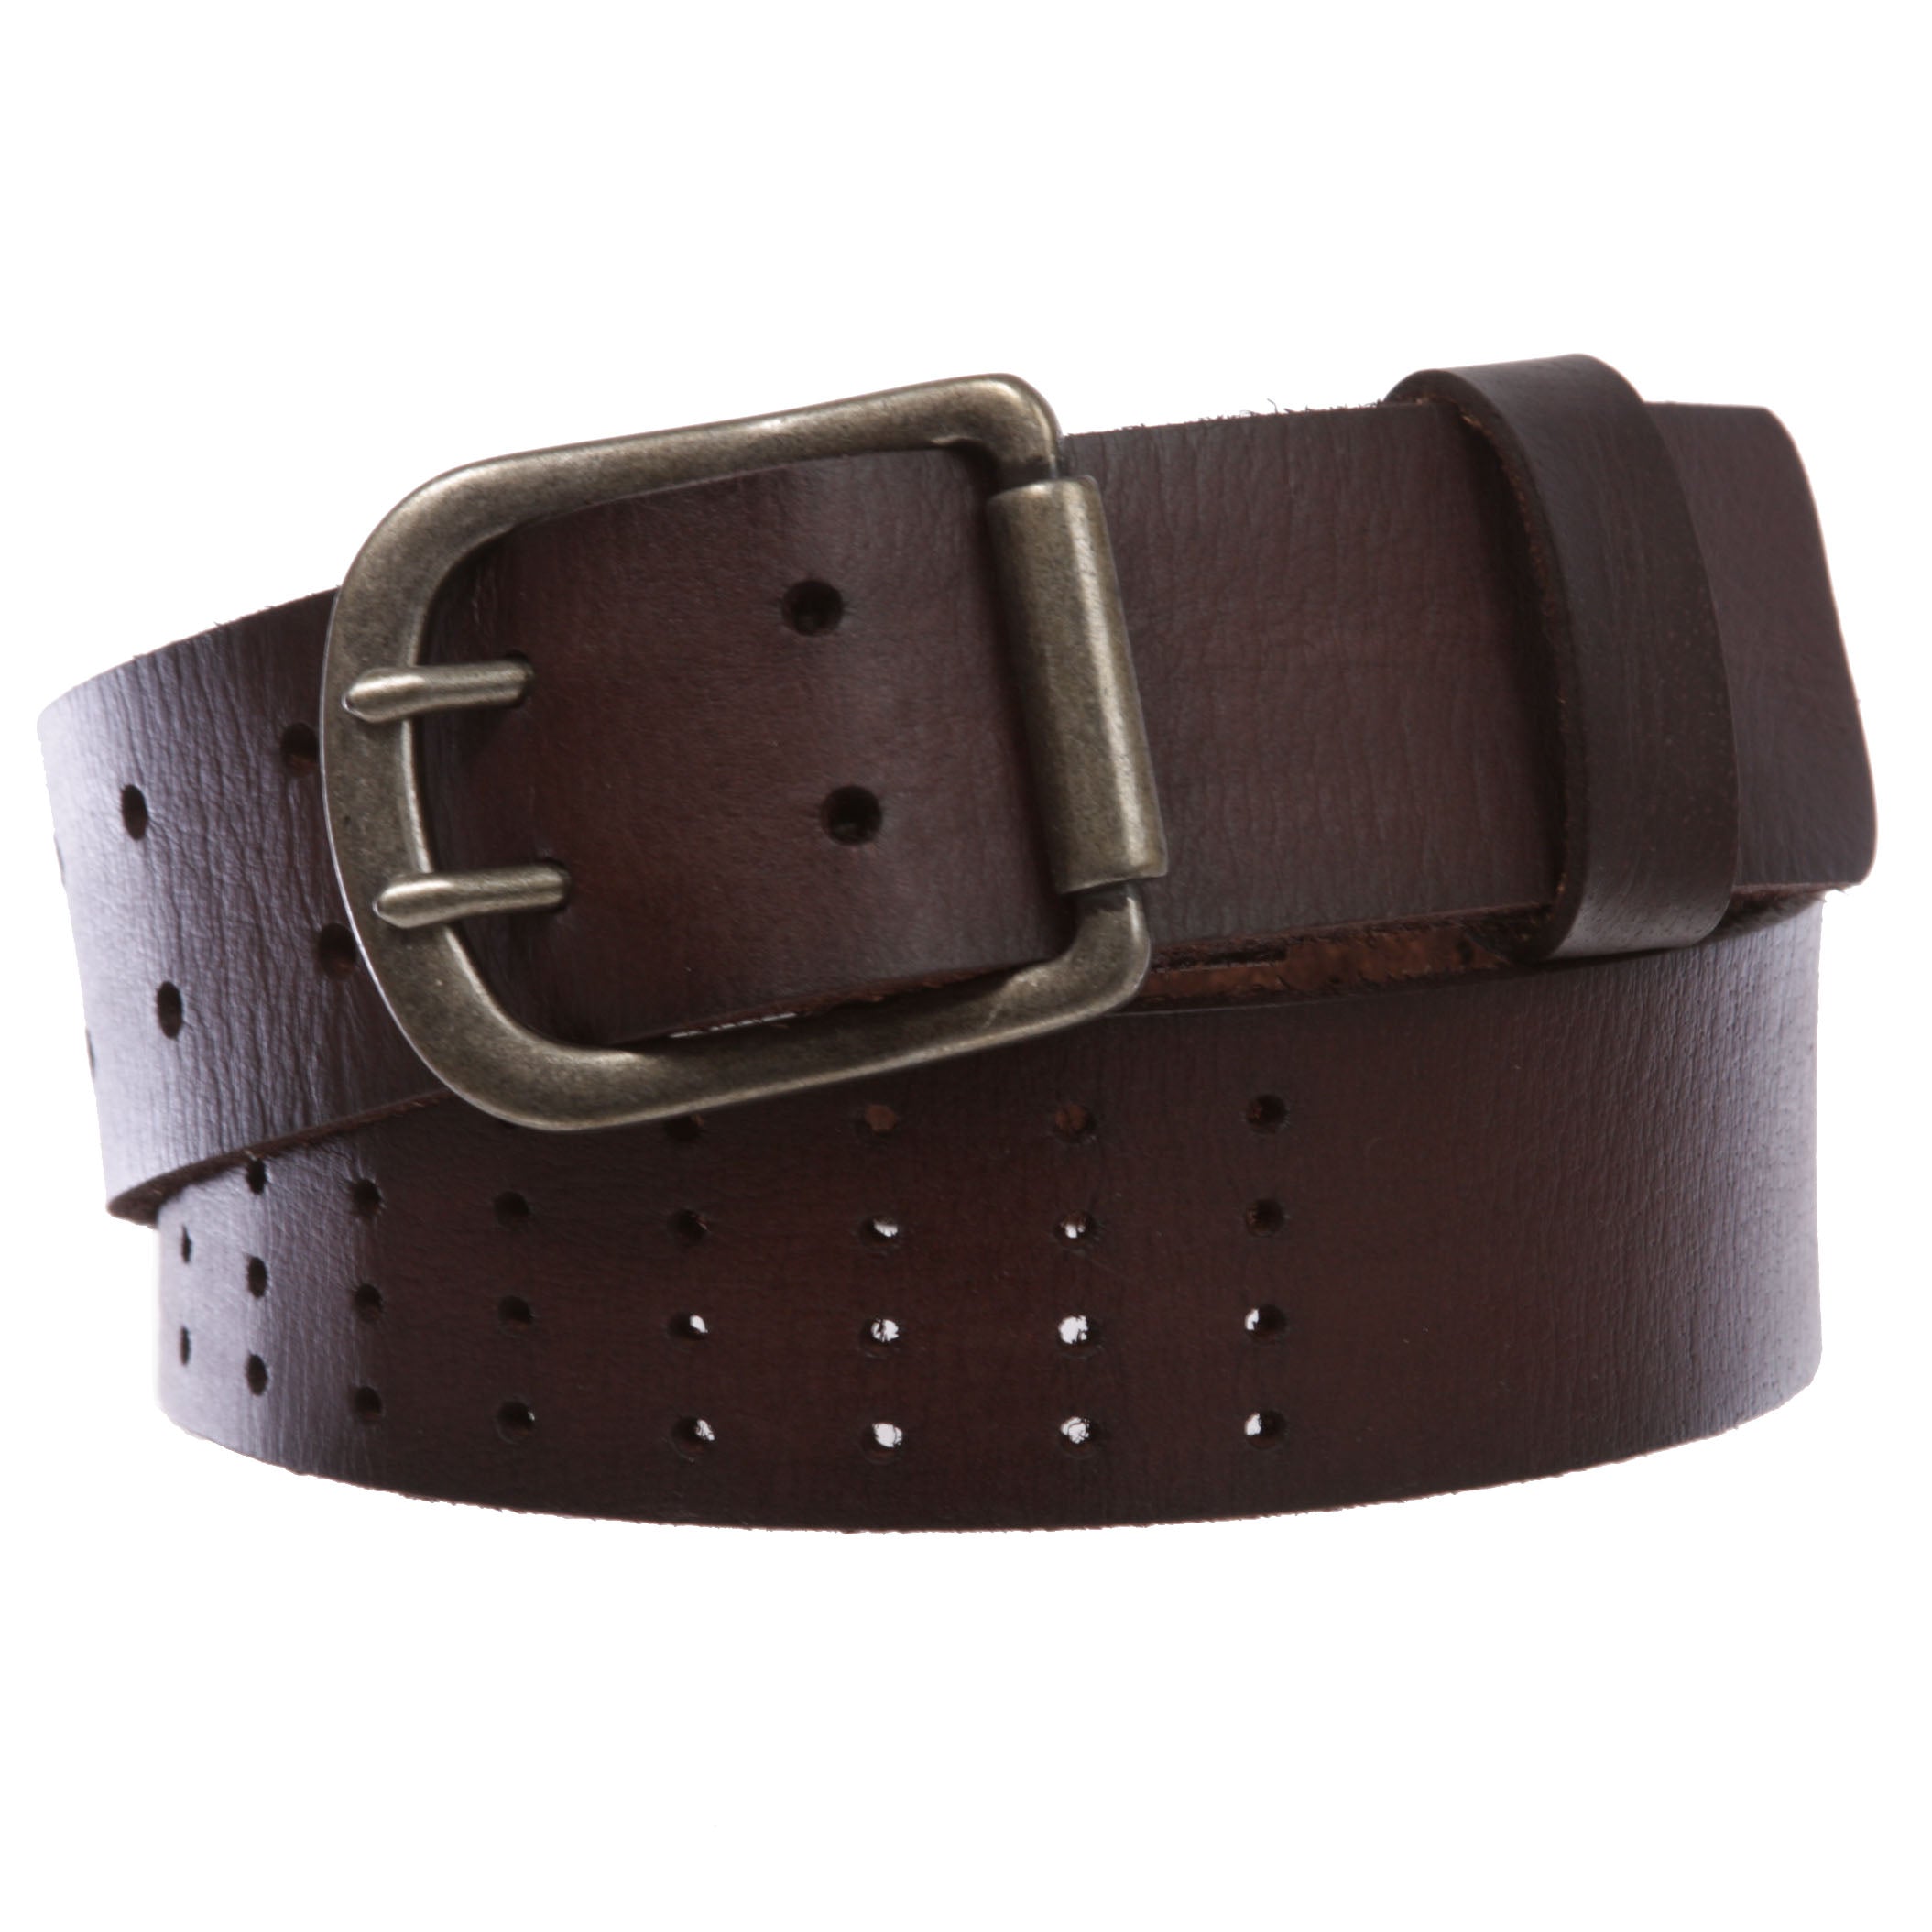 1 1/2" (40mm) Hollow Out Soft cowhide full grain leather Double Prong Belt